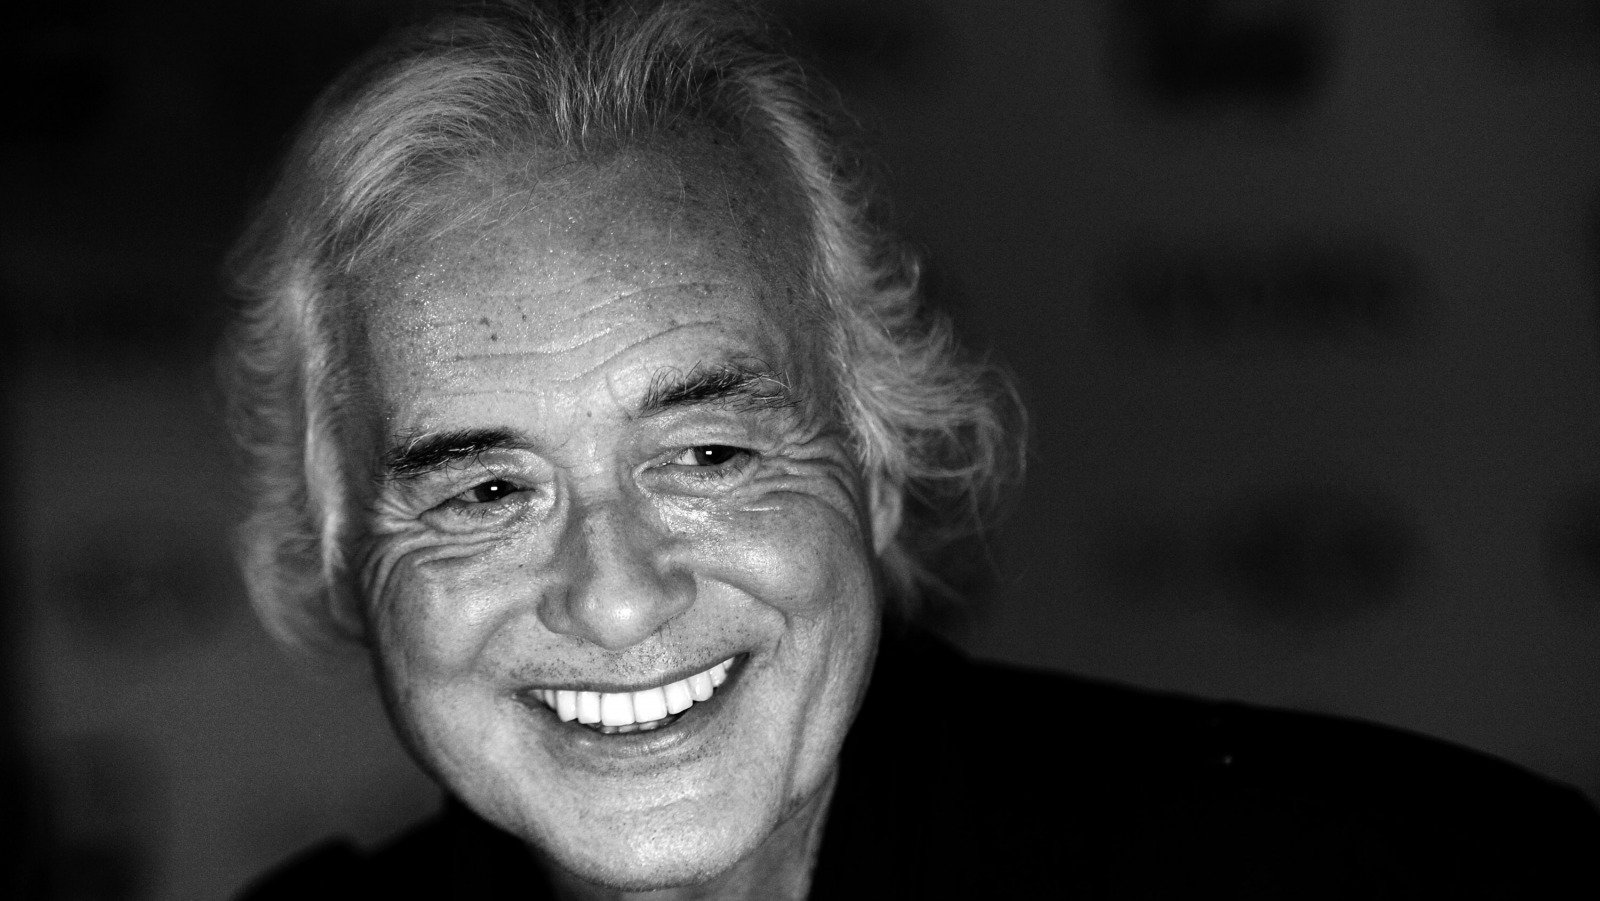 You Wouldn't Want To Meet Led Zeppelin's Jimmy Page In Real Life. Here's Why